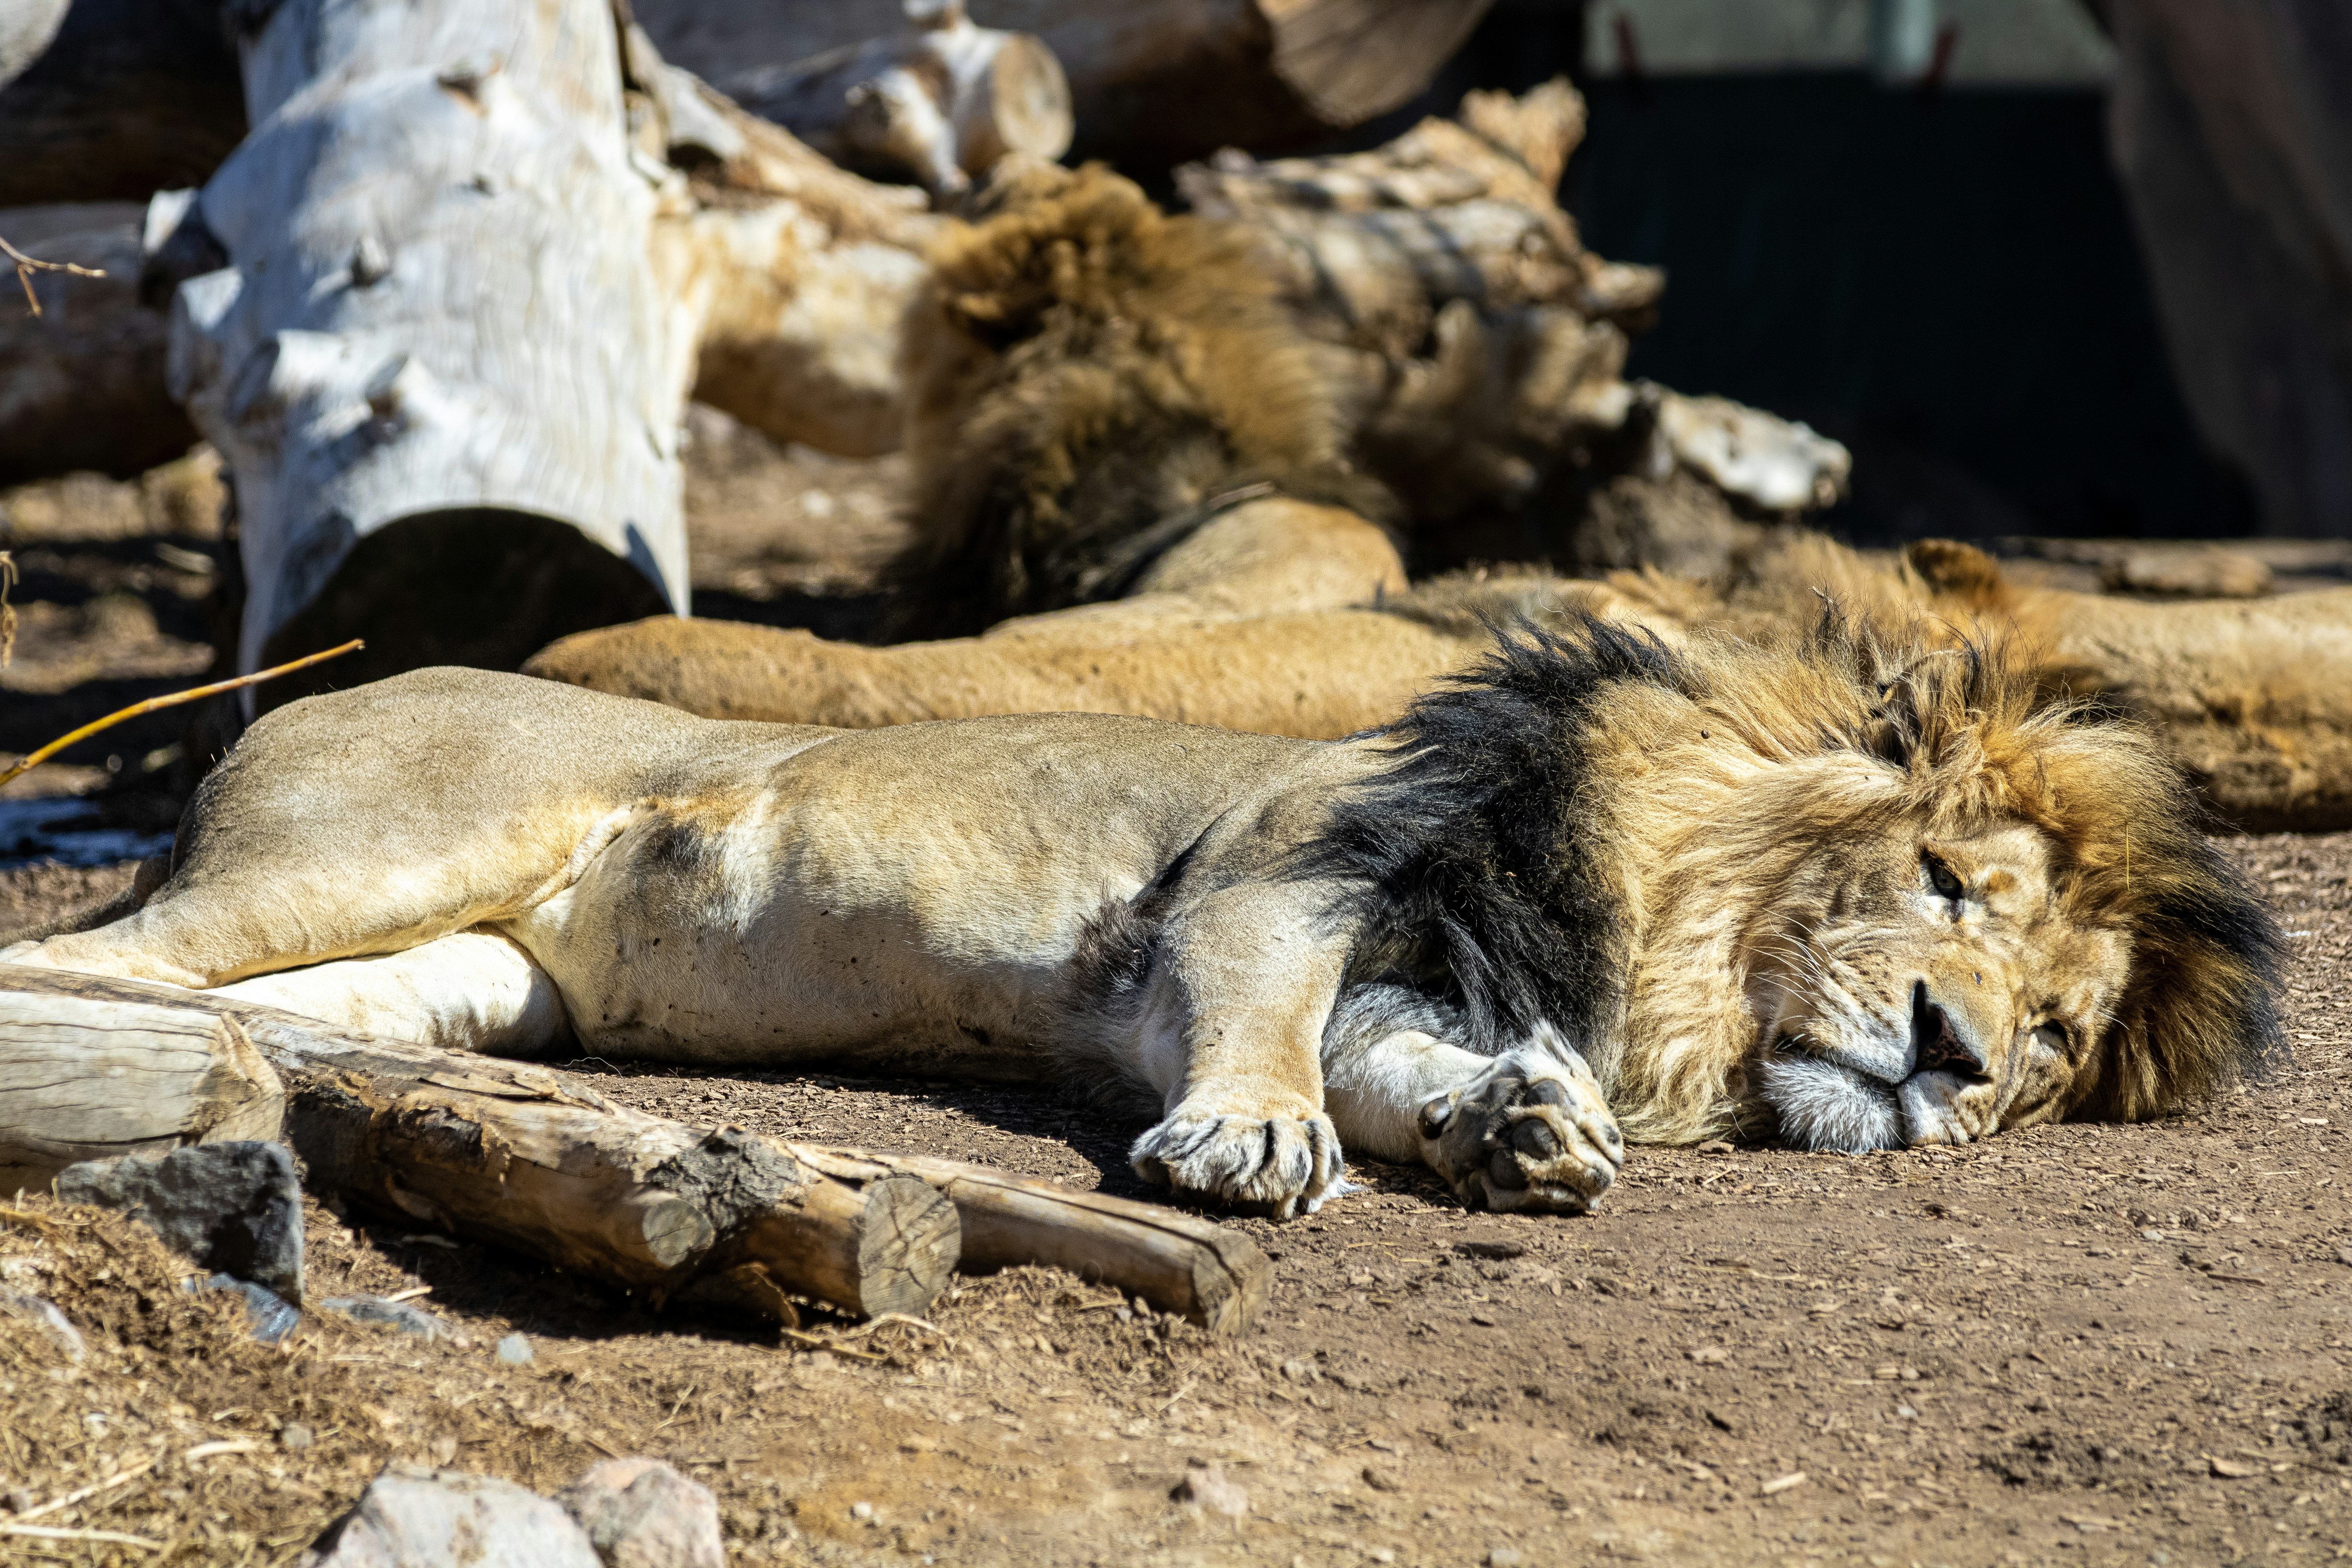 a lion just relaxing for a day of sunbathing at the zoo